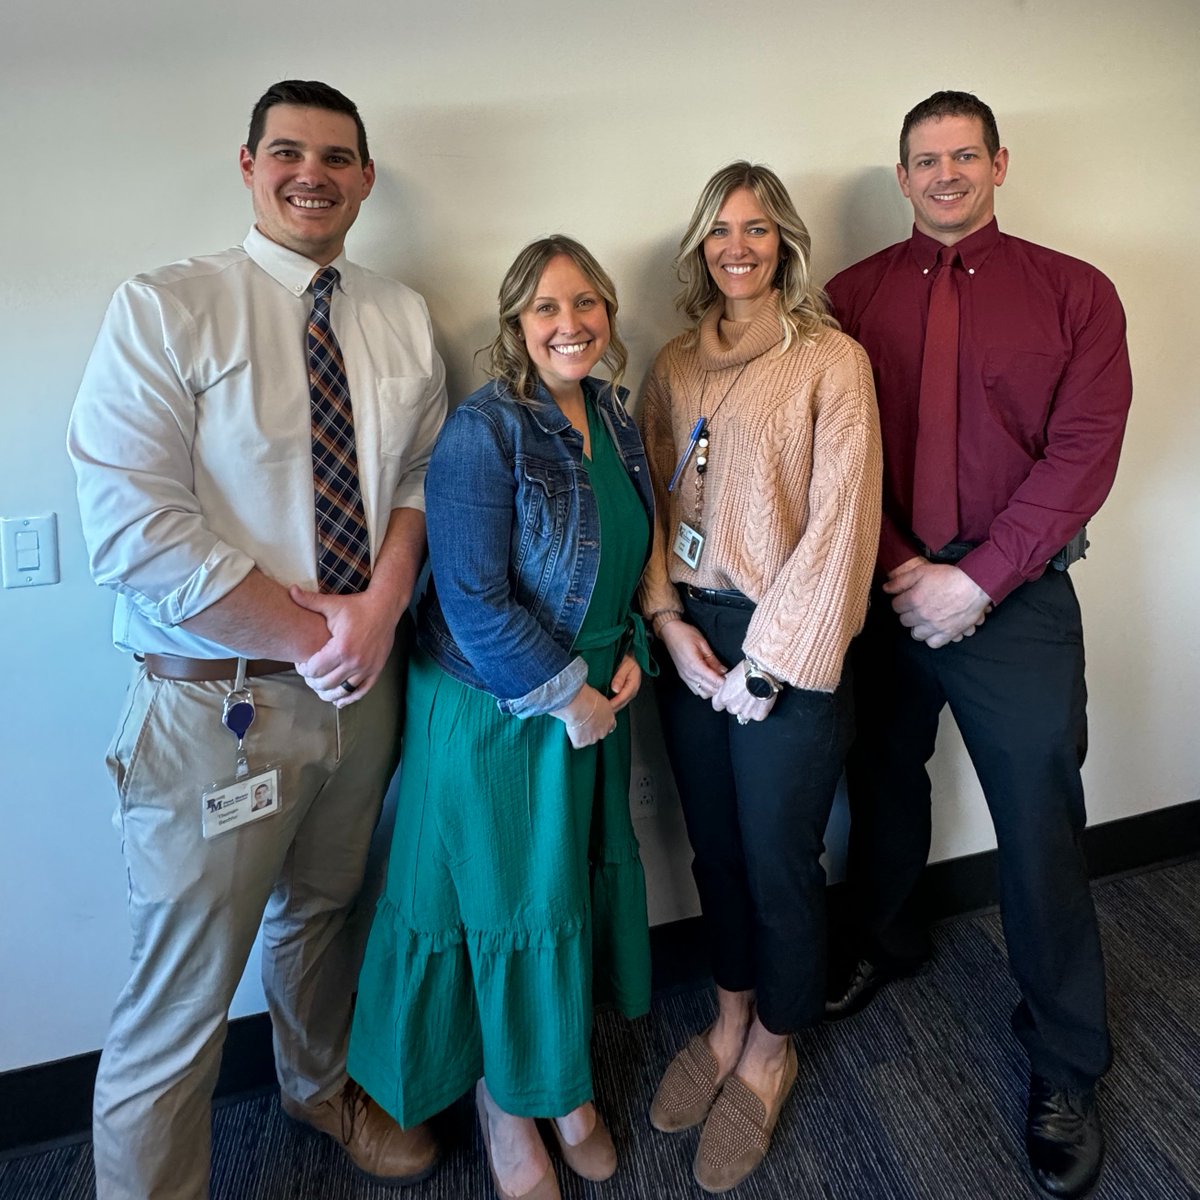 It is no joke that we have a great team when it comes to our Assistant Principals. When you get back to school on Wednesday, make sure to thank Mr. Bechtel, Mrs. Marsh, Mrs. Fisher, or Mr. Fowler when you see them around the building this week.
#NationalAssistantPrincipalsweek